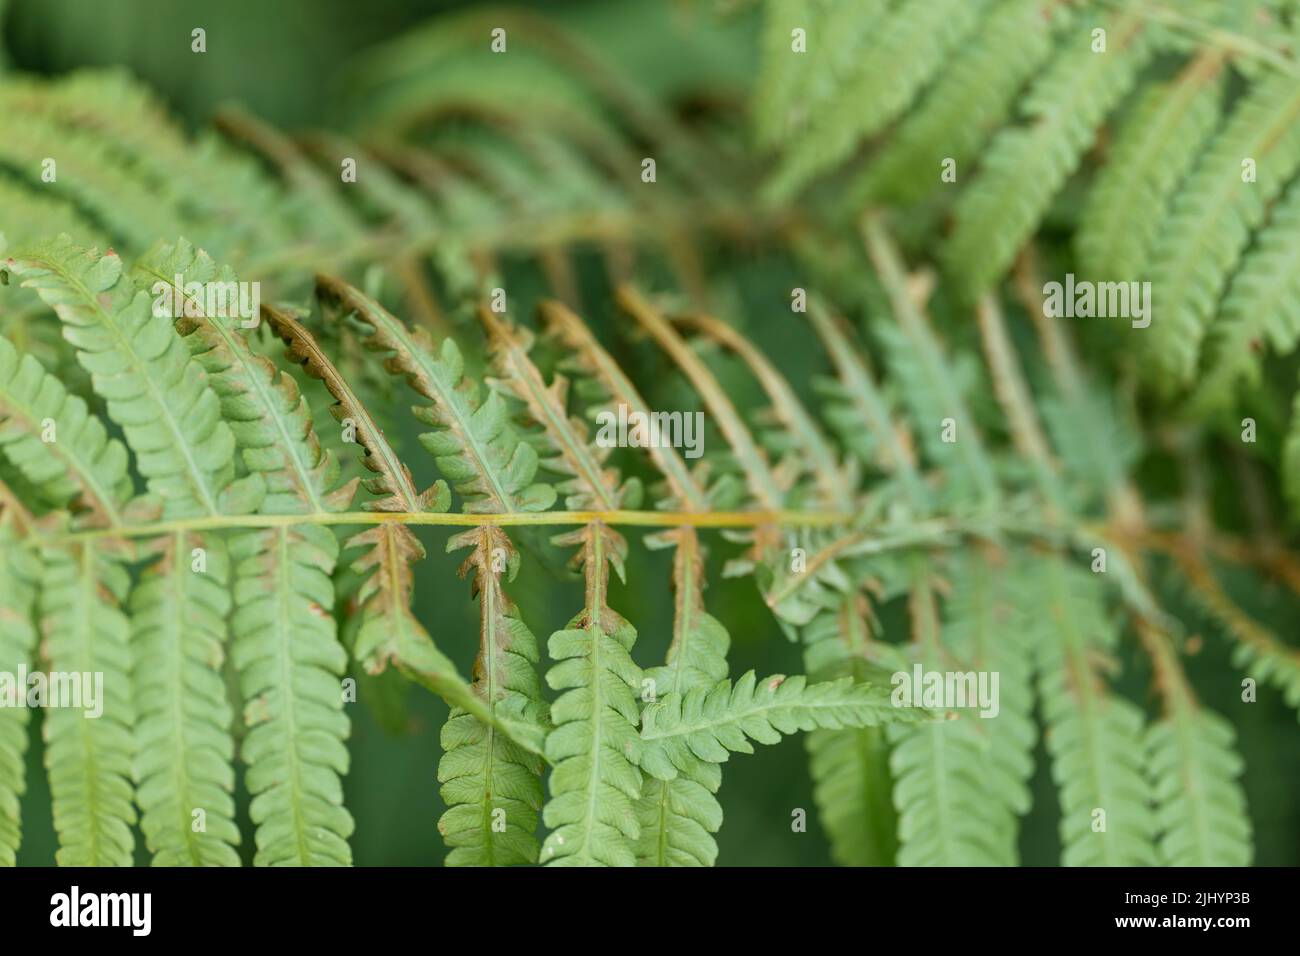 Fern leaves with heat damage after extremely hot temperatures in Juli 2022. Stock Photo